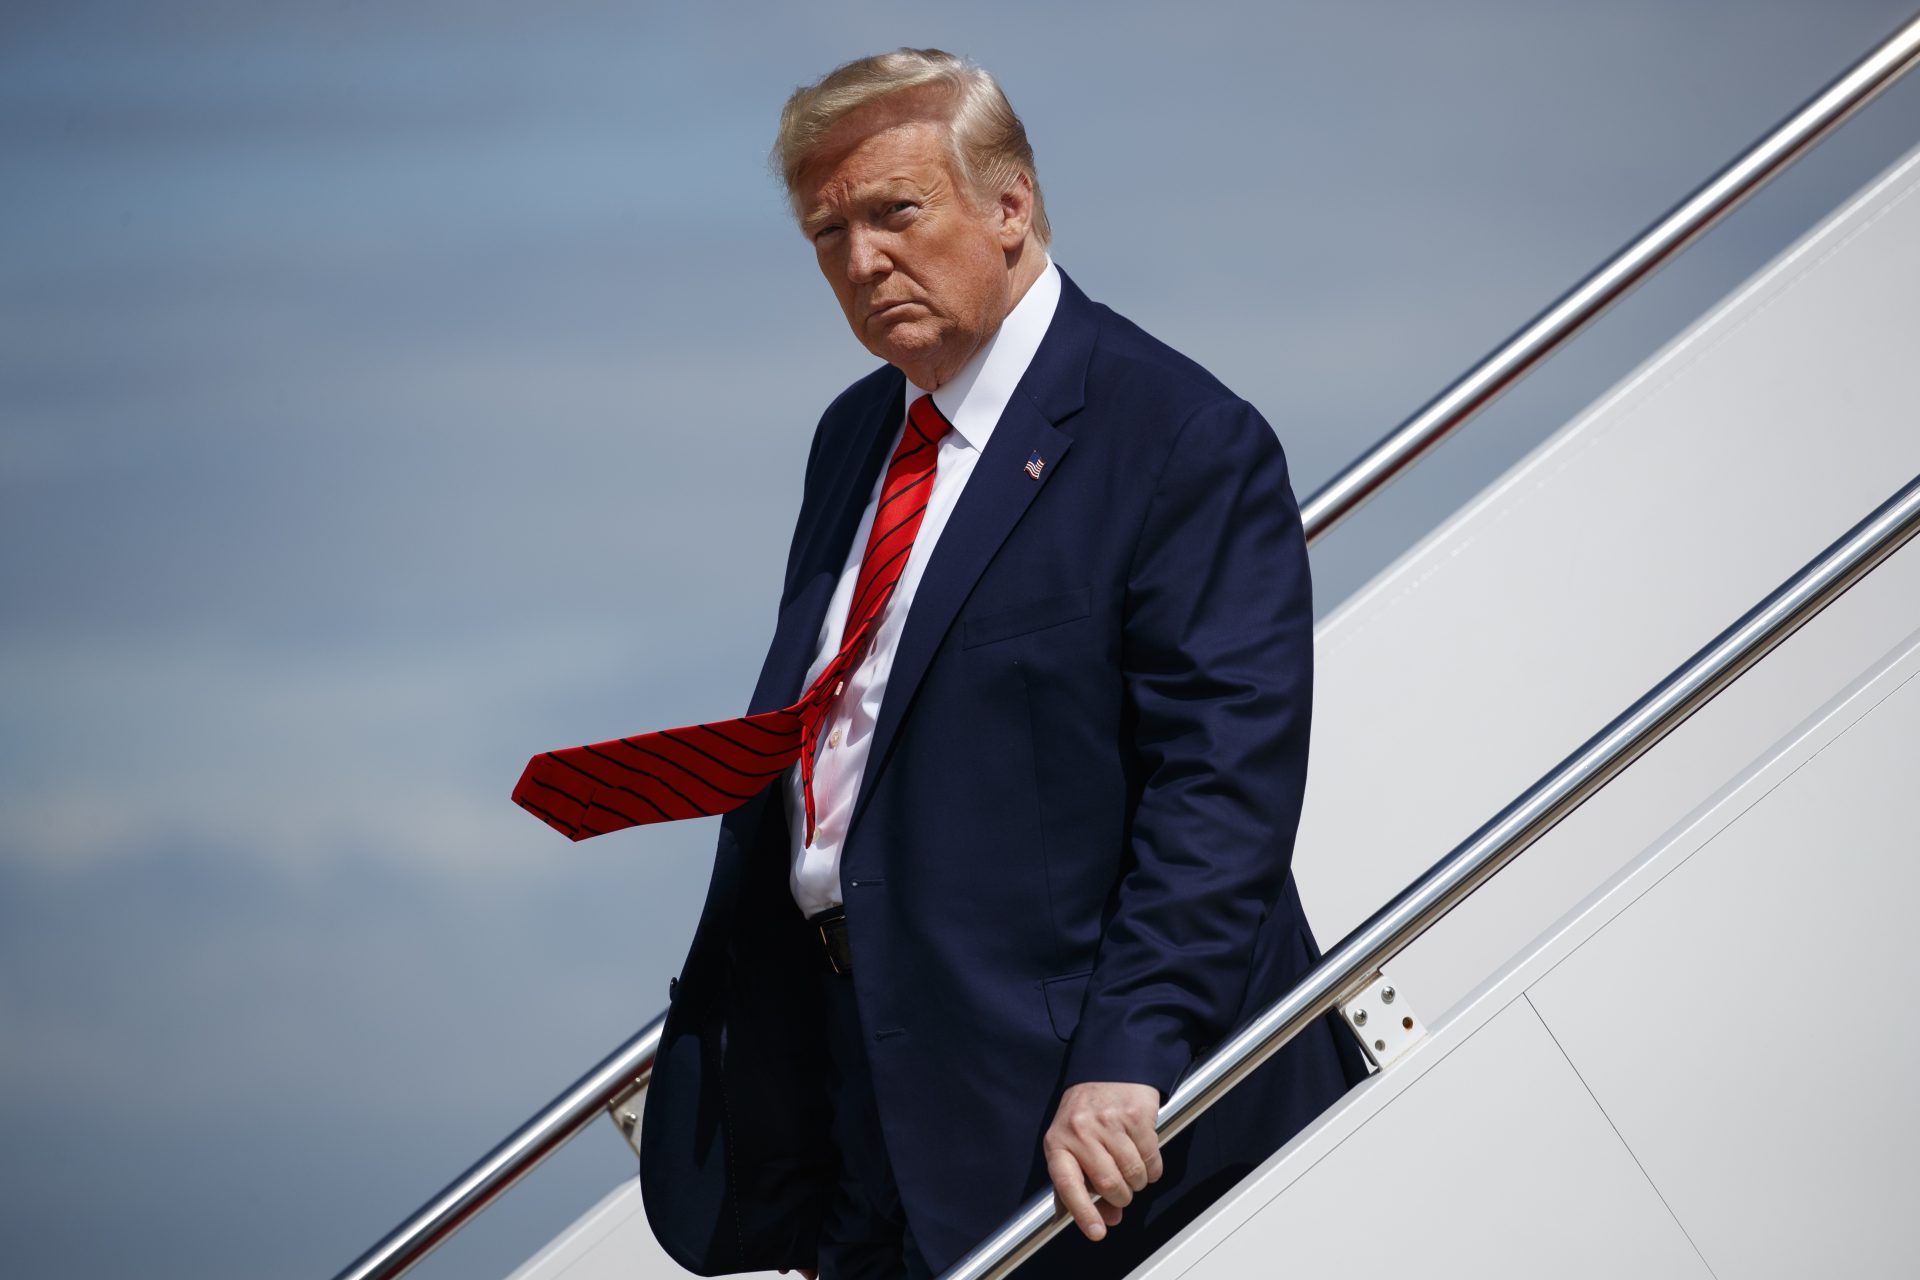 President Donald Trump steps off Air Force One after arriving at Andrews Air Force Base, Thursday, Sept. 26, 2019, in Andrews Air Force Base, Md. Trump had spent the week attending the United Nations General Assembly in New York.